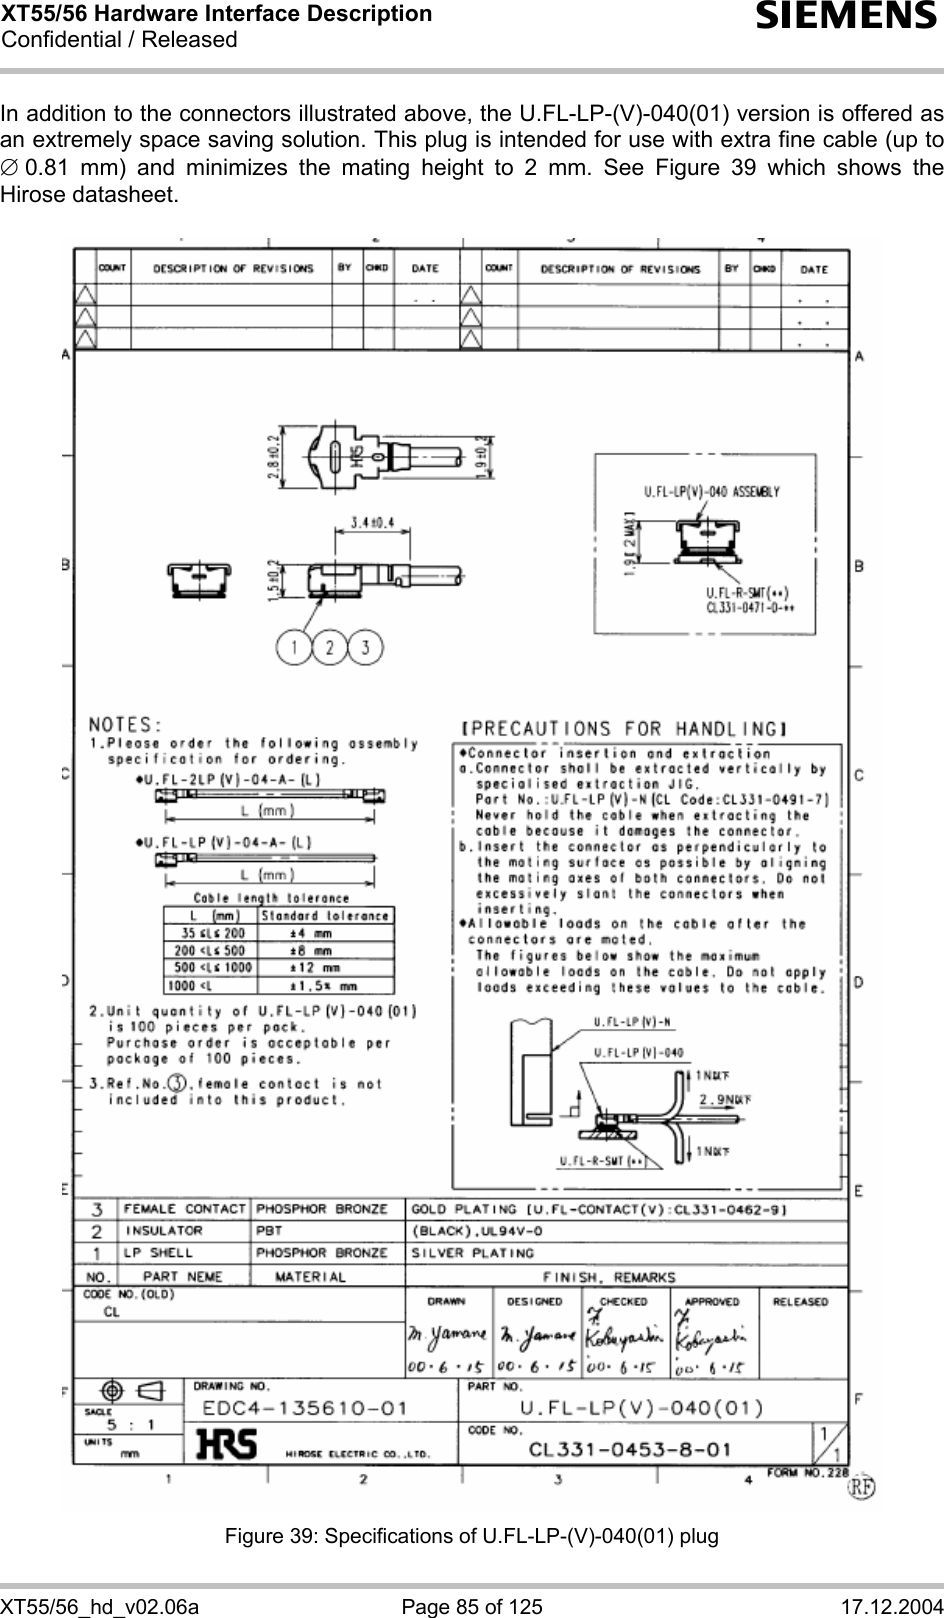 XT55/56 Hardware Interface Description Confidential / Released s XT55/56_hd_v02.06a  Page 85 of 125  17.12.2004 In addition to the connectors illustrated above, the U.FL-LP-(V)-040(01) version is offered as an extremely space saving solution. This plug is intended for use with extra fine cable (up to ∅ 0.81 mm) and minimizes the mating height to 2 mm. See Figure 39 which shows the Hirose datasheet.    Figure 39: Specifications of U.FL-LP-(V)-040(01) plug 